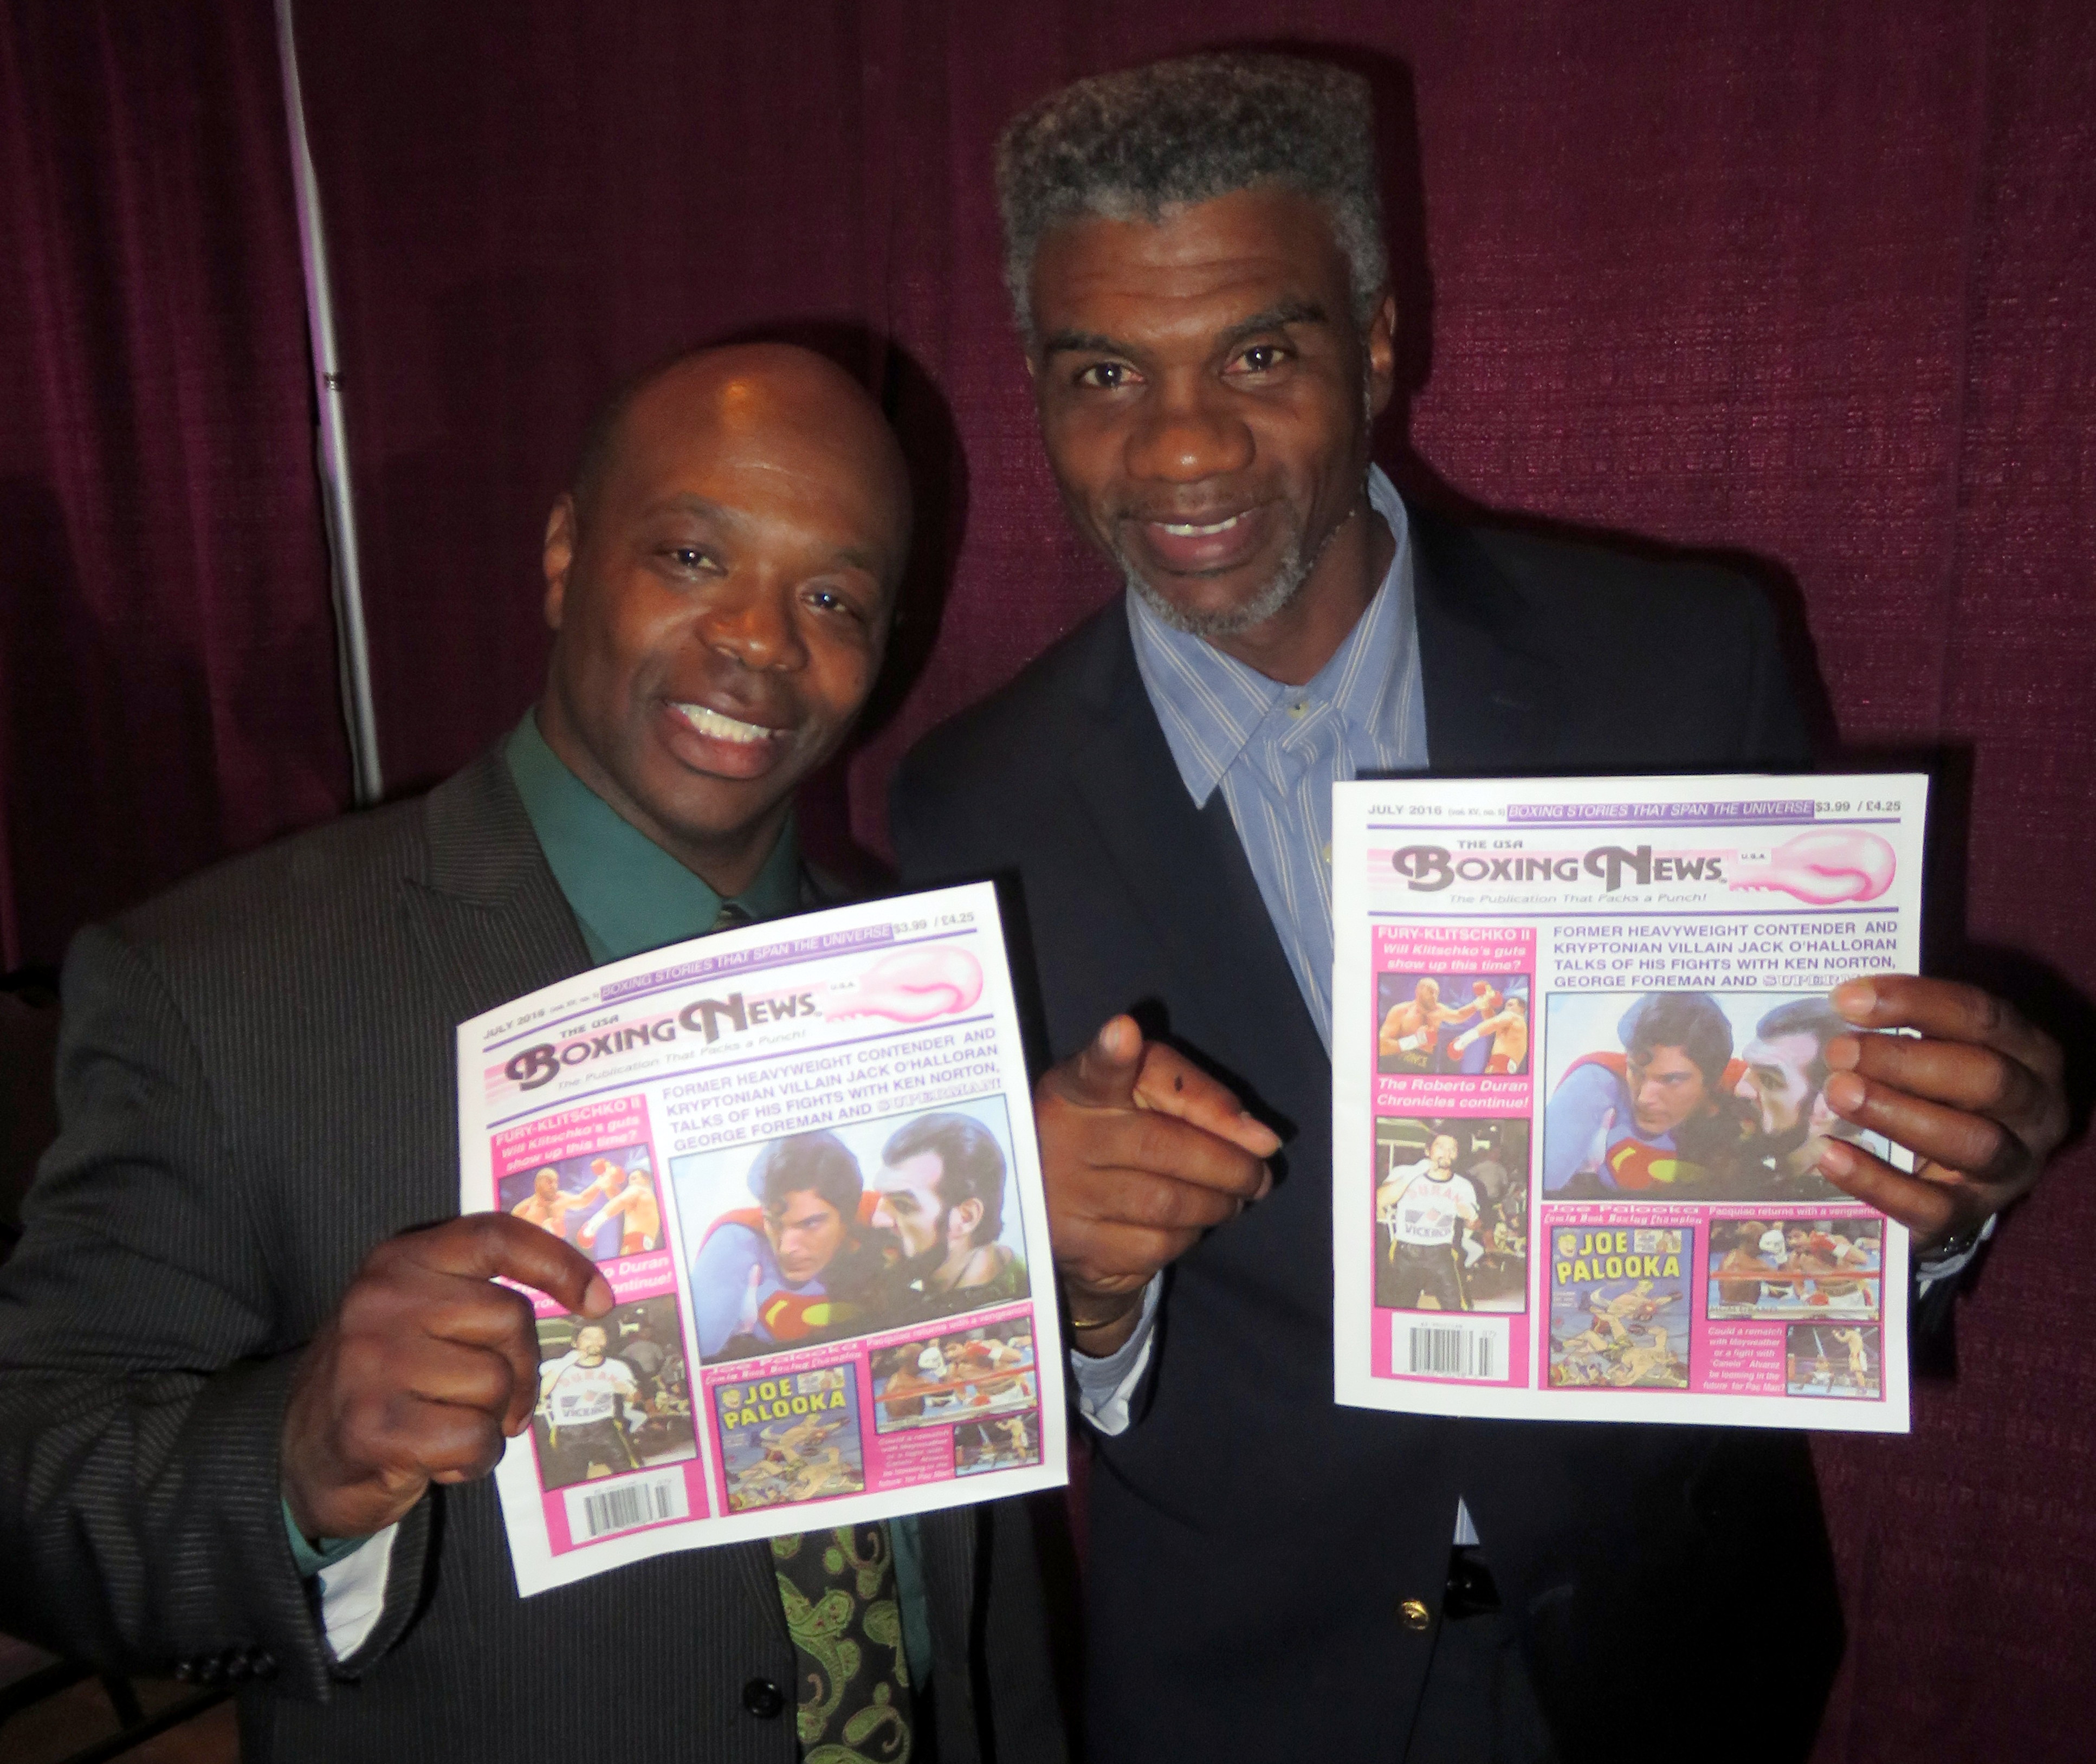 FINALThe USA Boxing News with former IBF super feather king and WBC super bantam champ Tracey Harris Patterson.